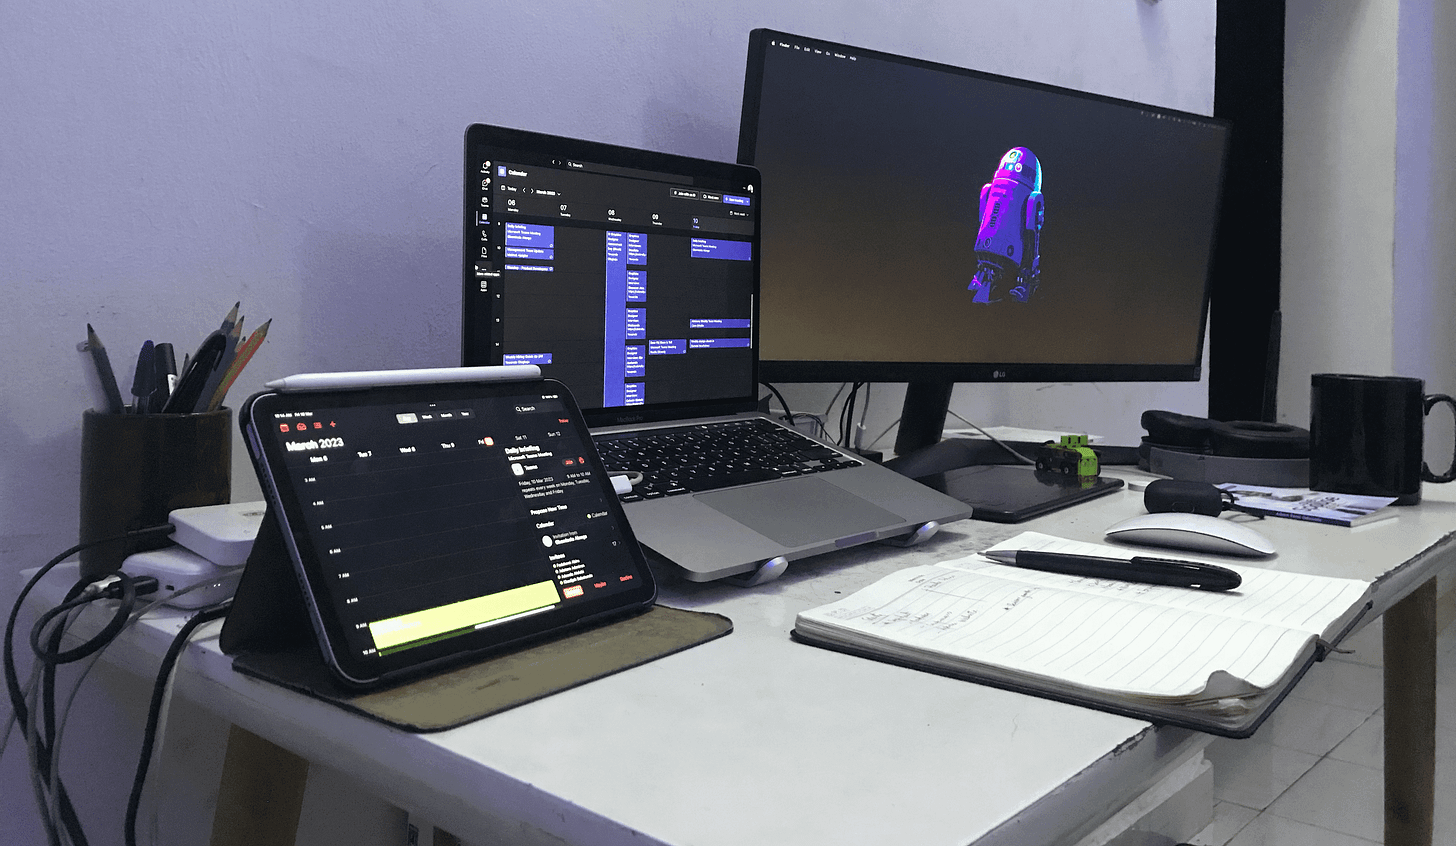 Dumebi Workspace showing a includes a 2022 M2 MacBook Pro, a 29” LG ultra wide monitor, an Apple keyboard with numeric keypad, the Apple mouse, a Huion graphic tablet, and an iPad mini 6 with an Apple Pencil